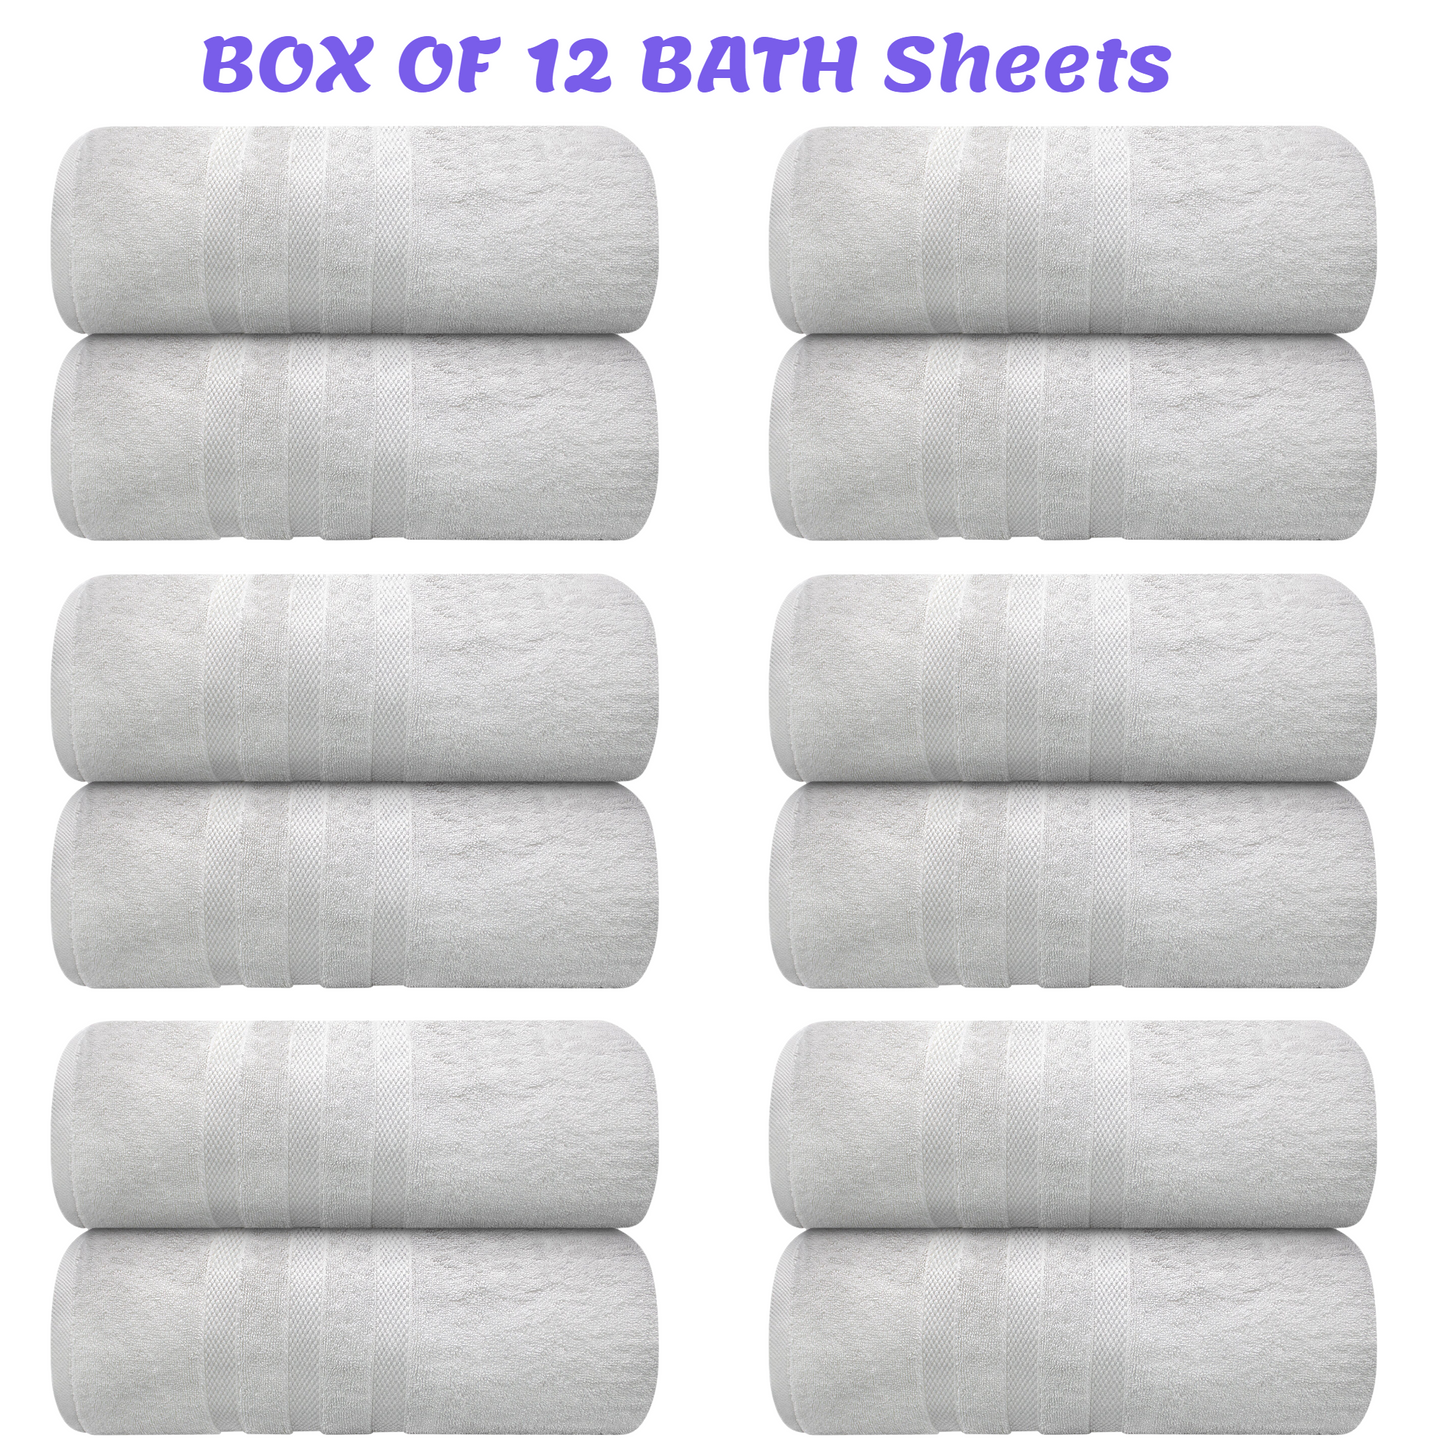 Wholesale Turkwell Bath Sheets Towels, 100% Combed Cotton, 35x70 in, Extra Large, White, BOX of 12